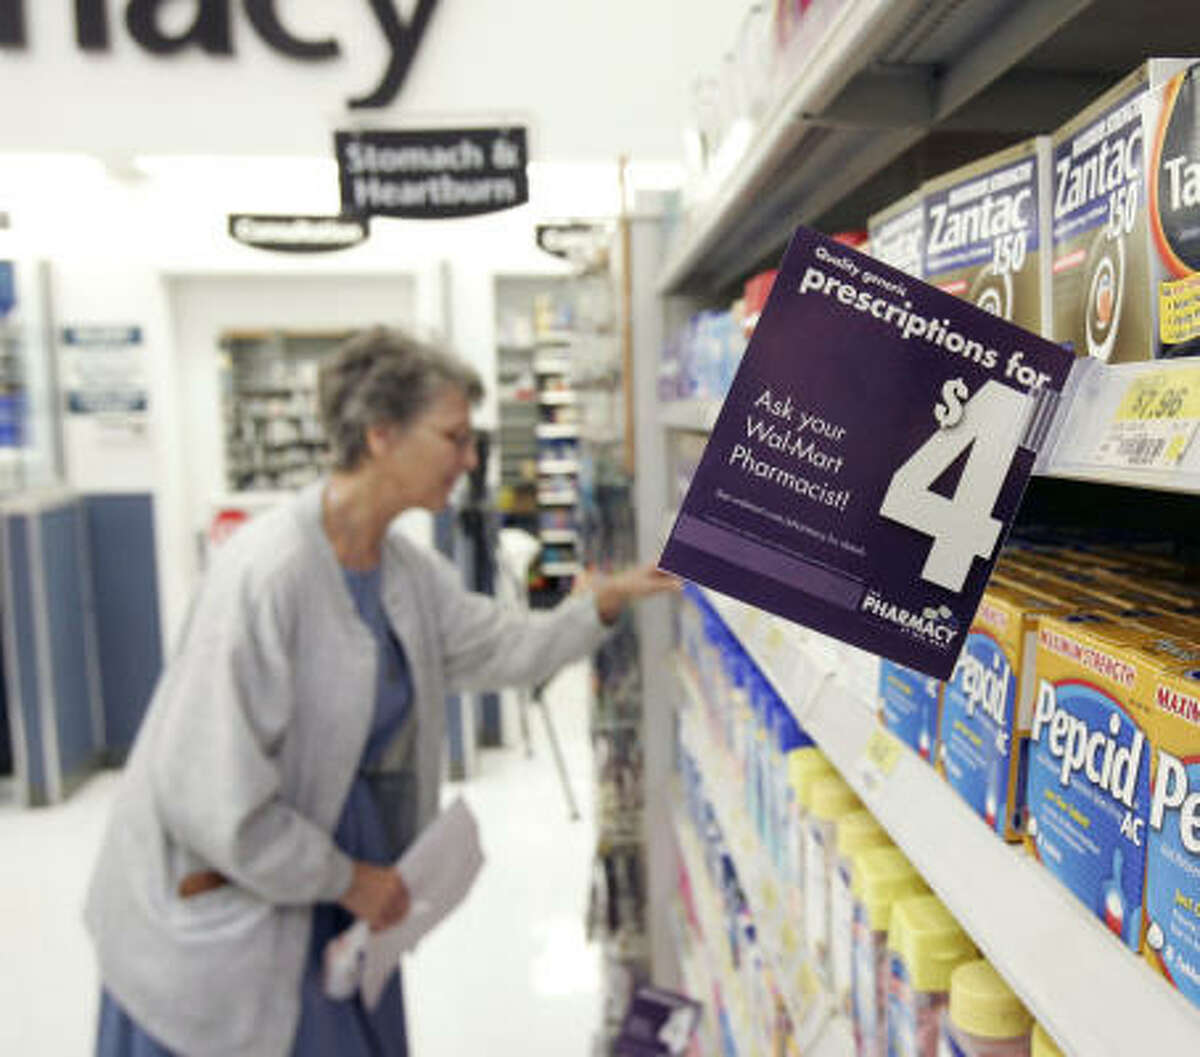 Cyrene Winkler looks through the off-the-shelf products after picking up a prescription at a Wal-Mart on Tomball Parkway. She is interested in saving money with the $4 generic drug program. After a successful test in Florida, Wal-Mart is introducing the plan in 14 additional states, including Texas.